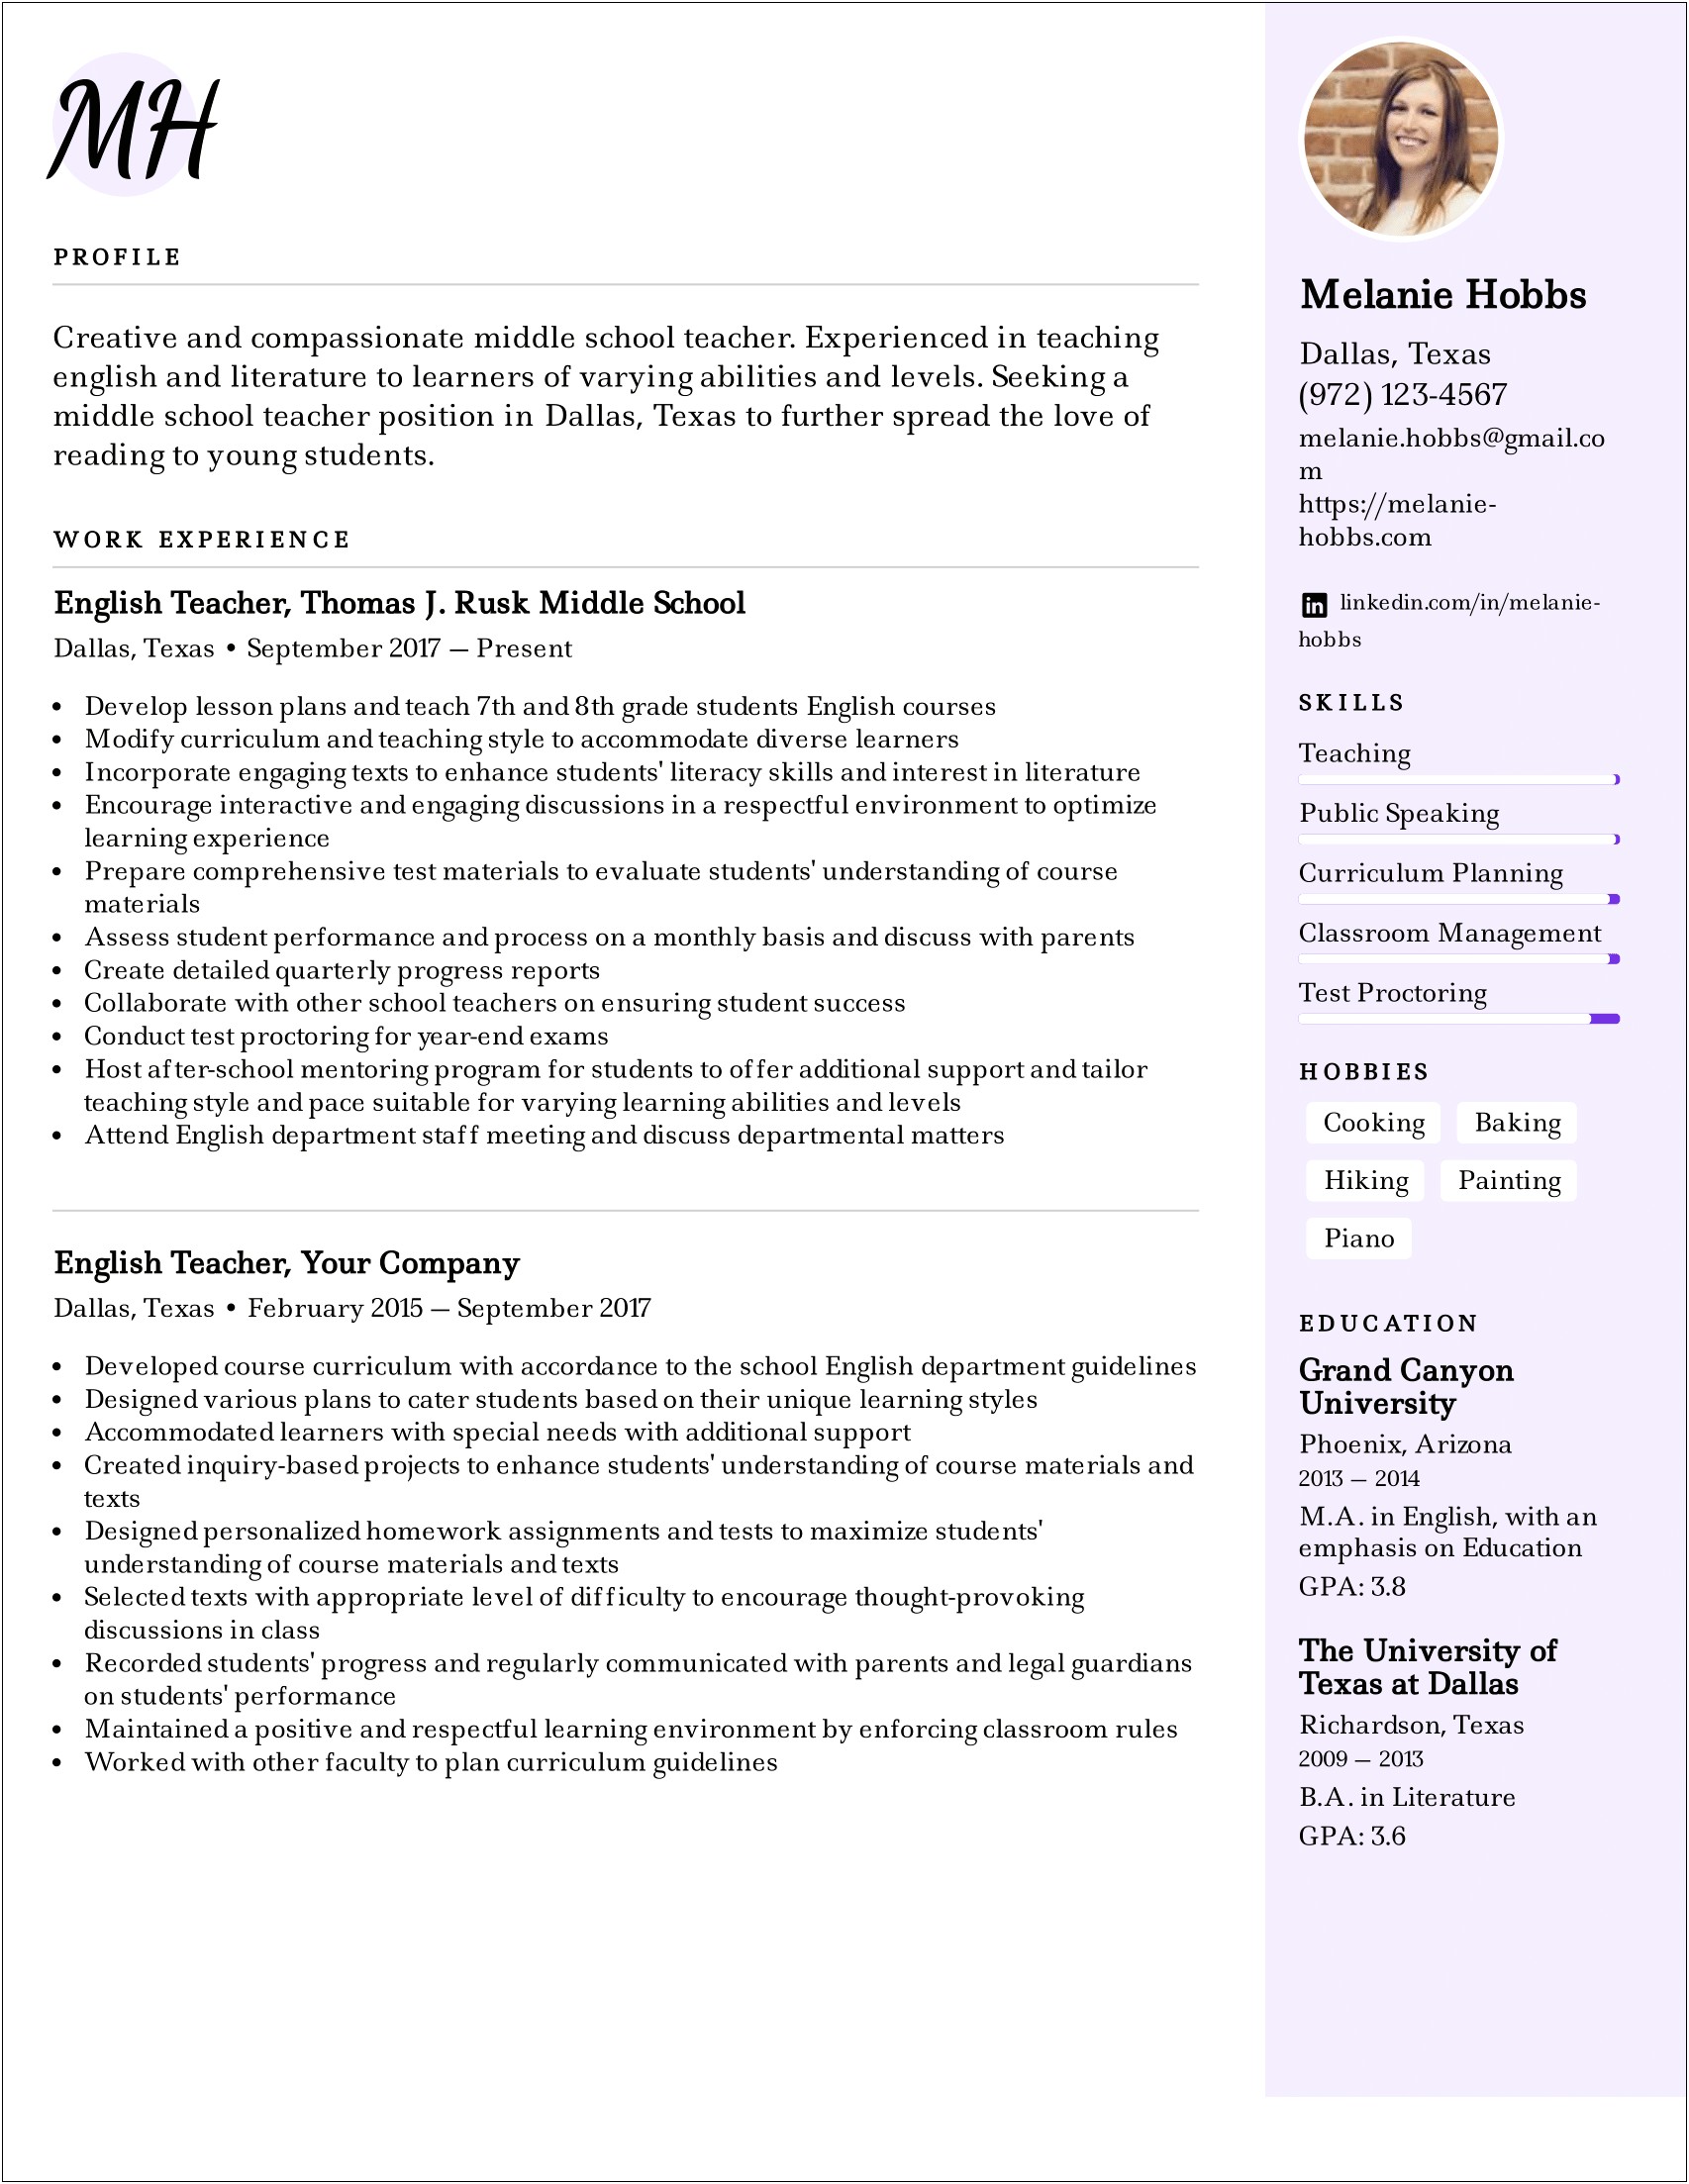 Education Section On Professional Resume Example